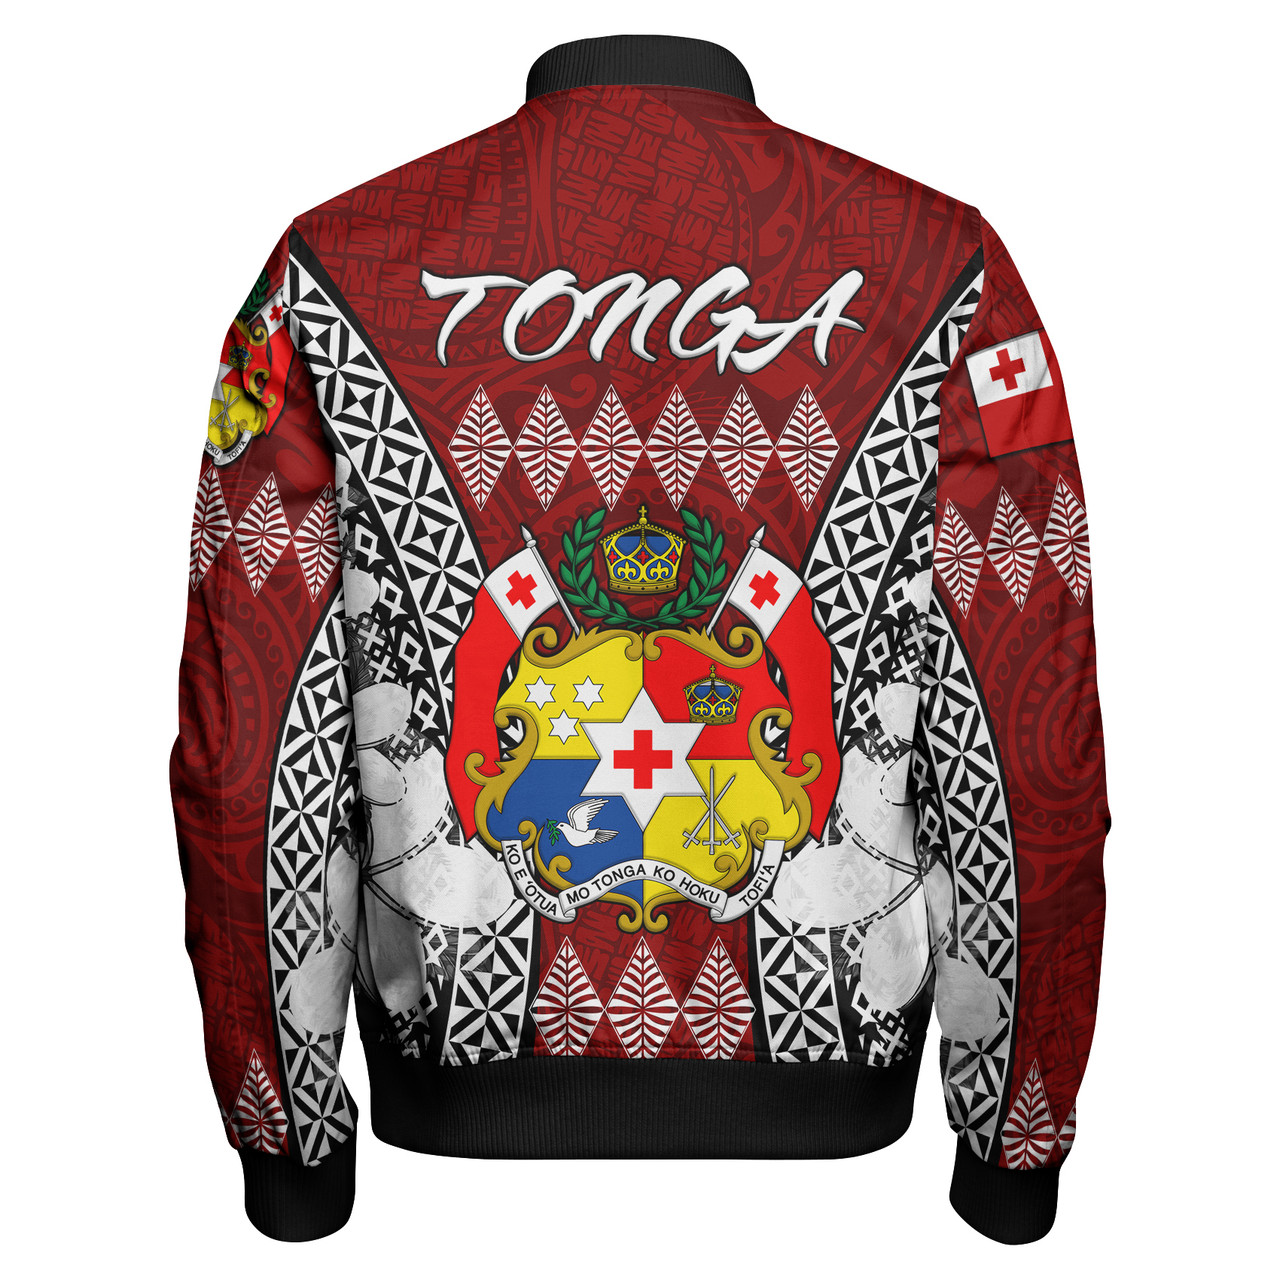 Tonga Bomber Jacket - Pattern Inspired By Tonga And Polynesian With Coat Of Arms